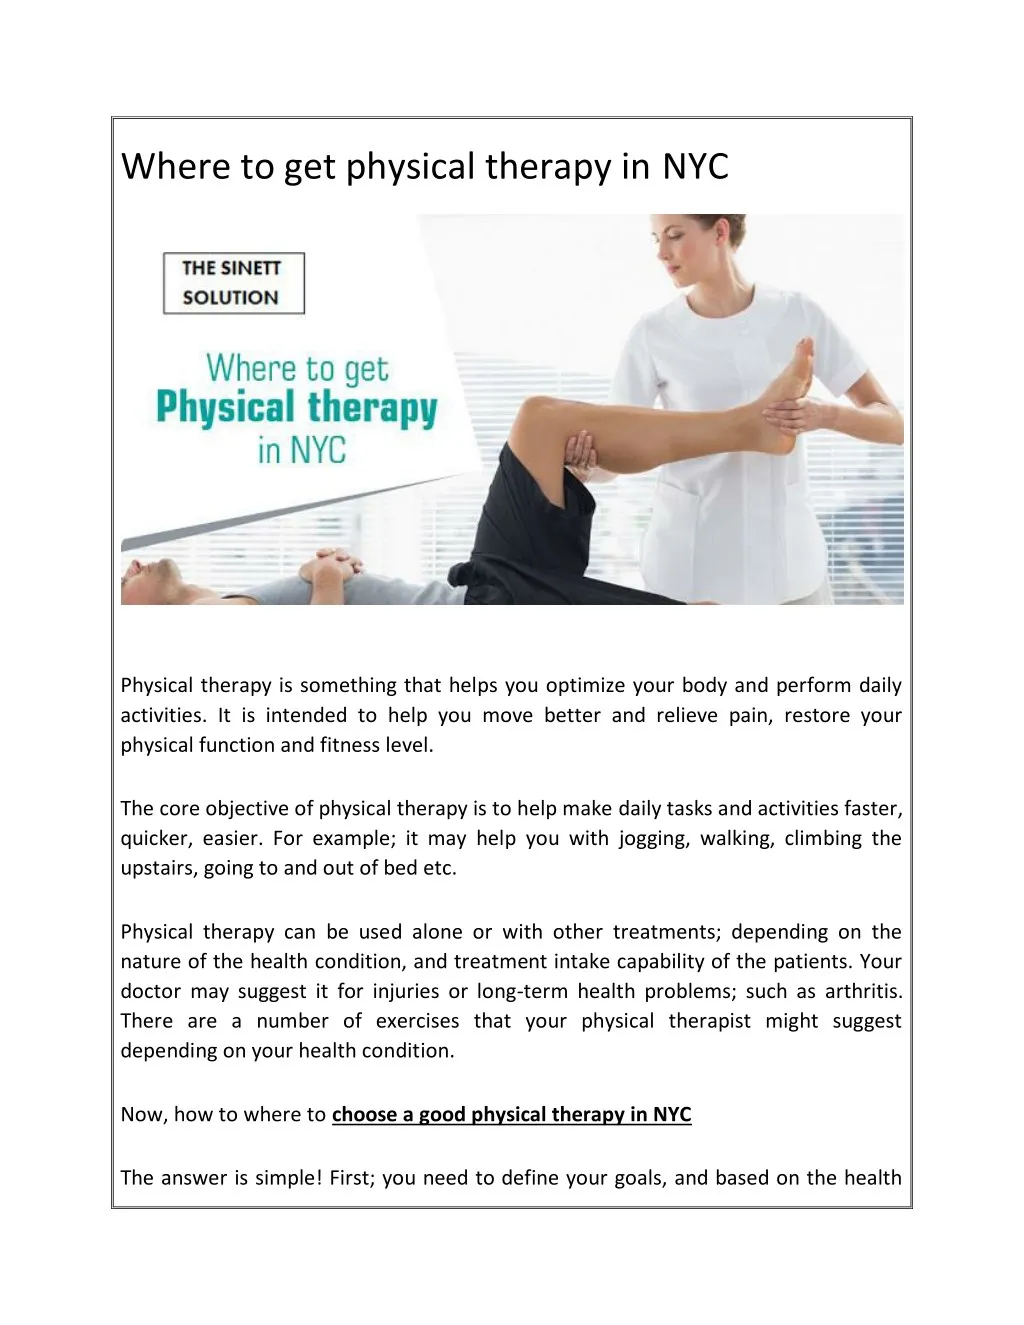 where to get physical therapy in nyc